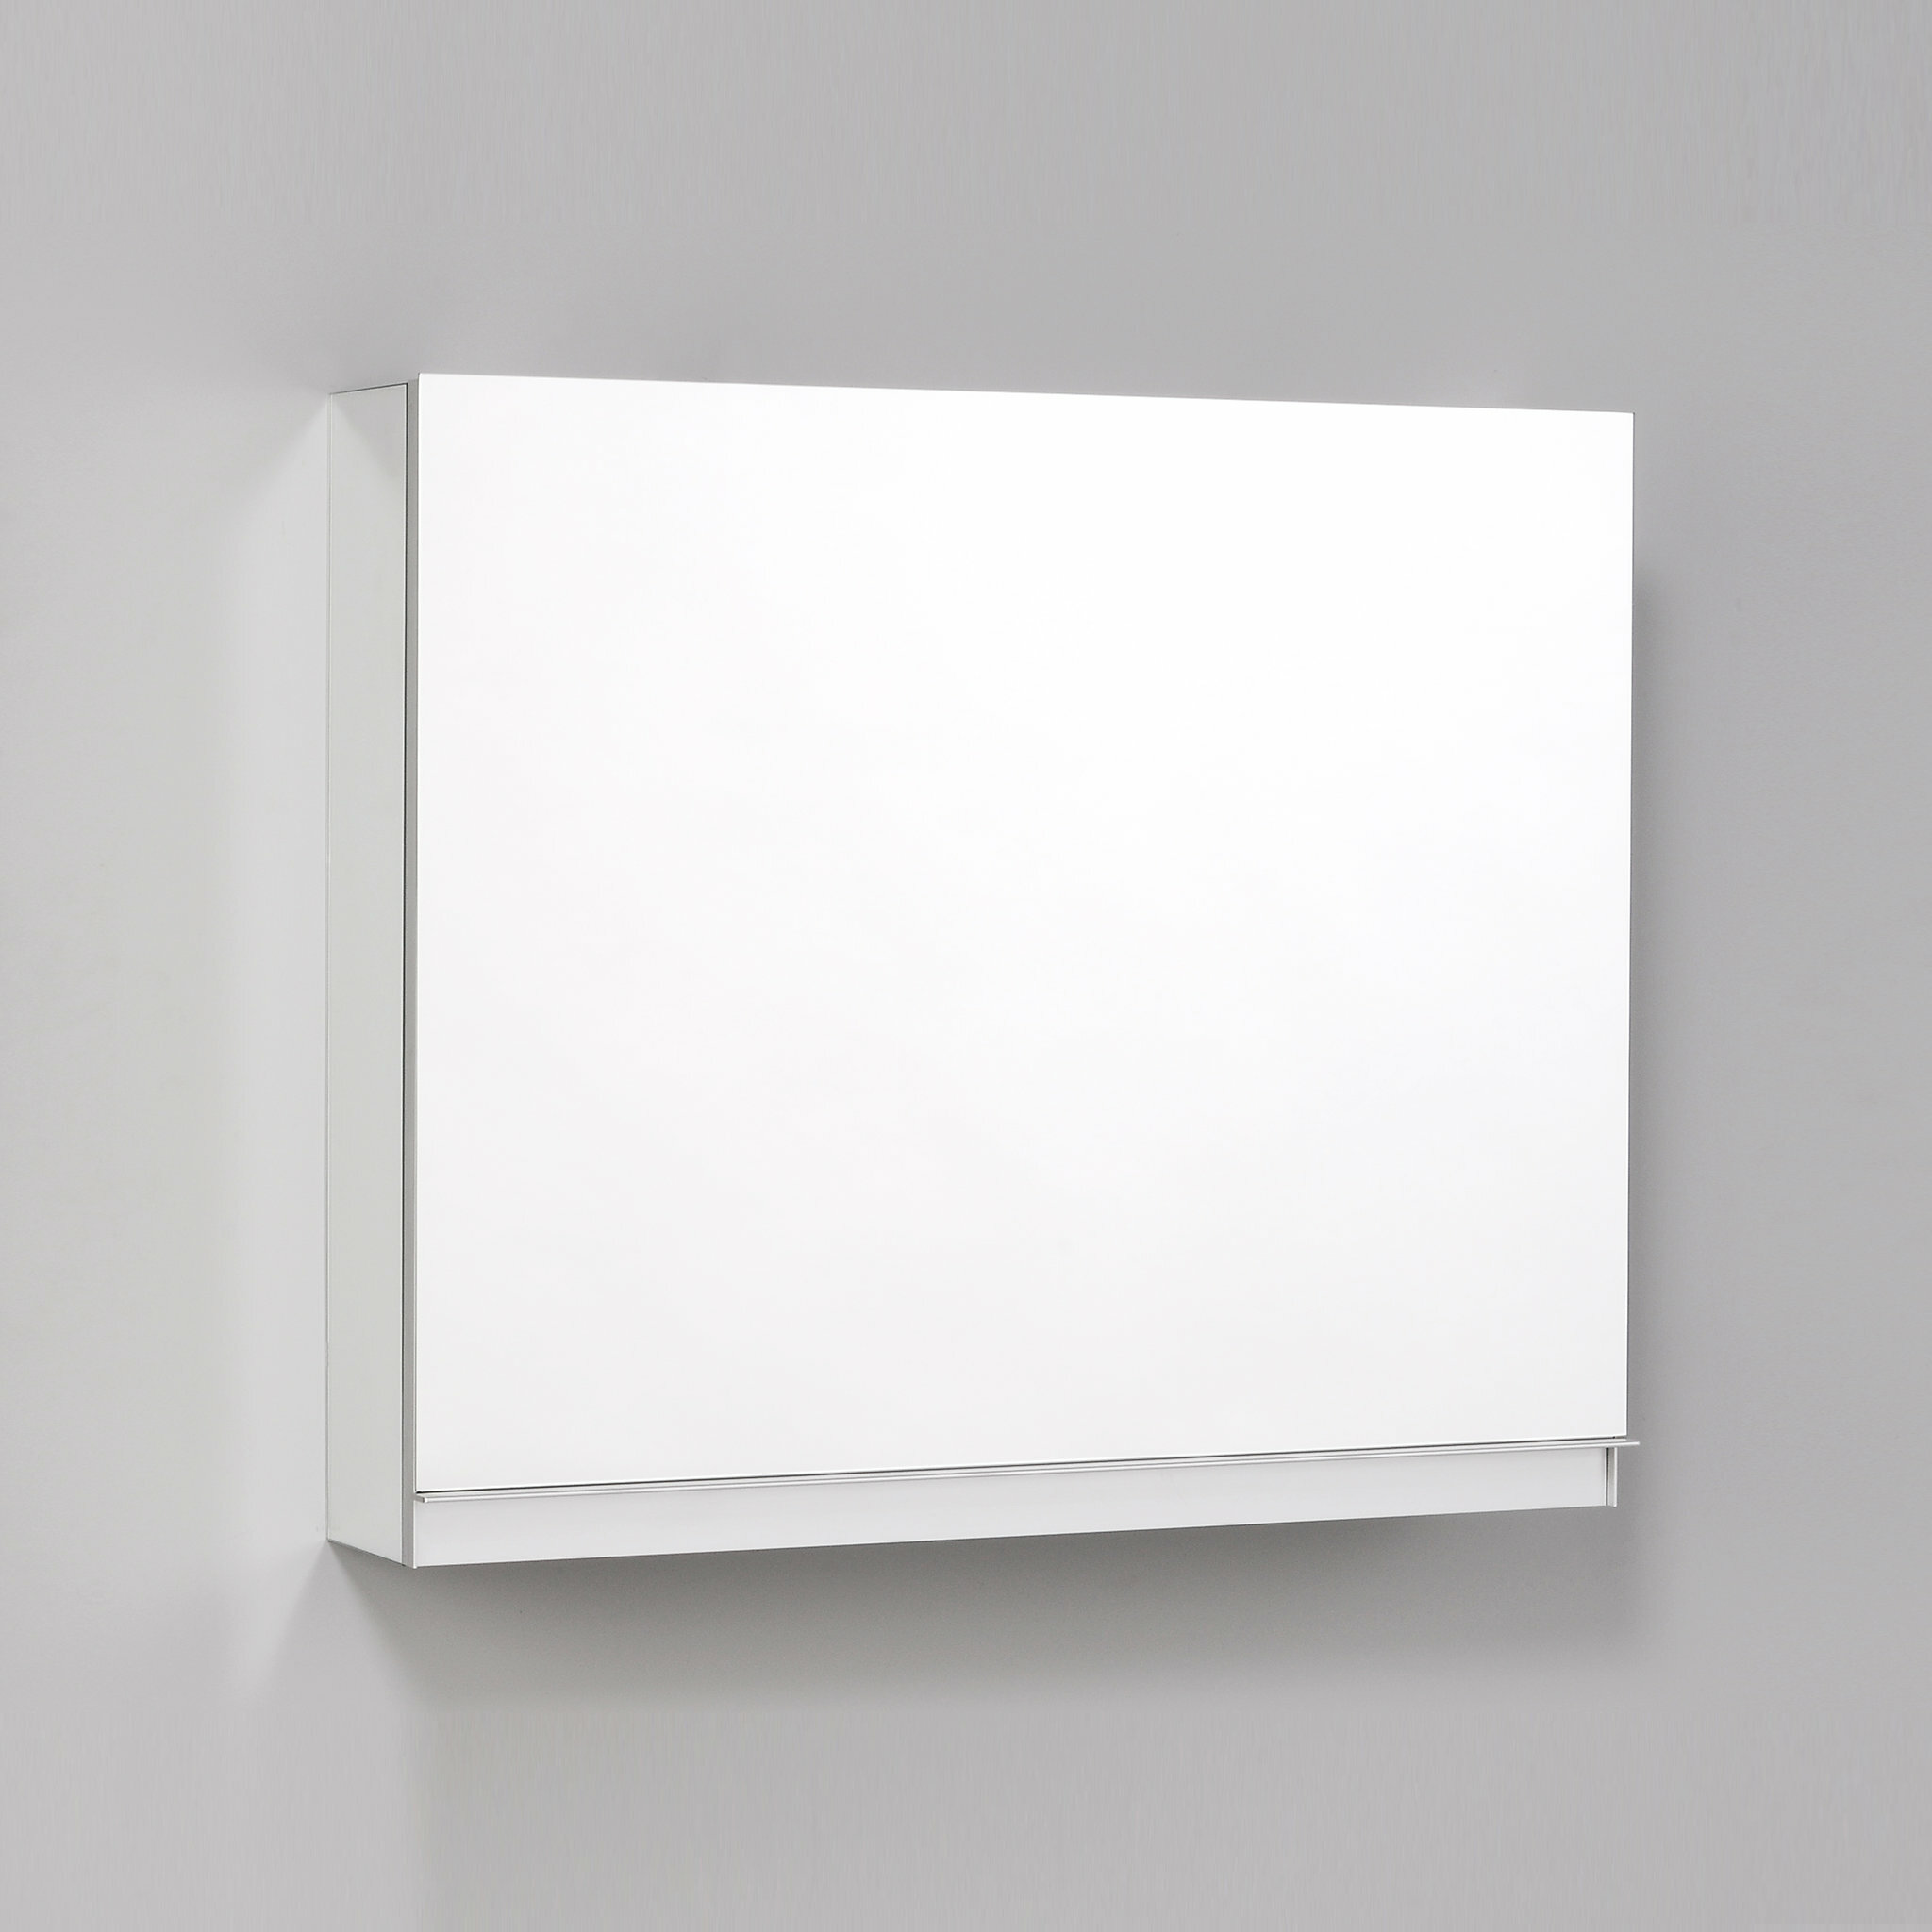 Uplift Series 48 X 27 Recessed Or Surface Mount Medicine Cabinet With Night Light And Mirror Defogger